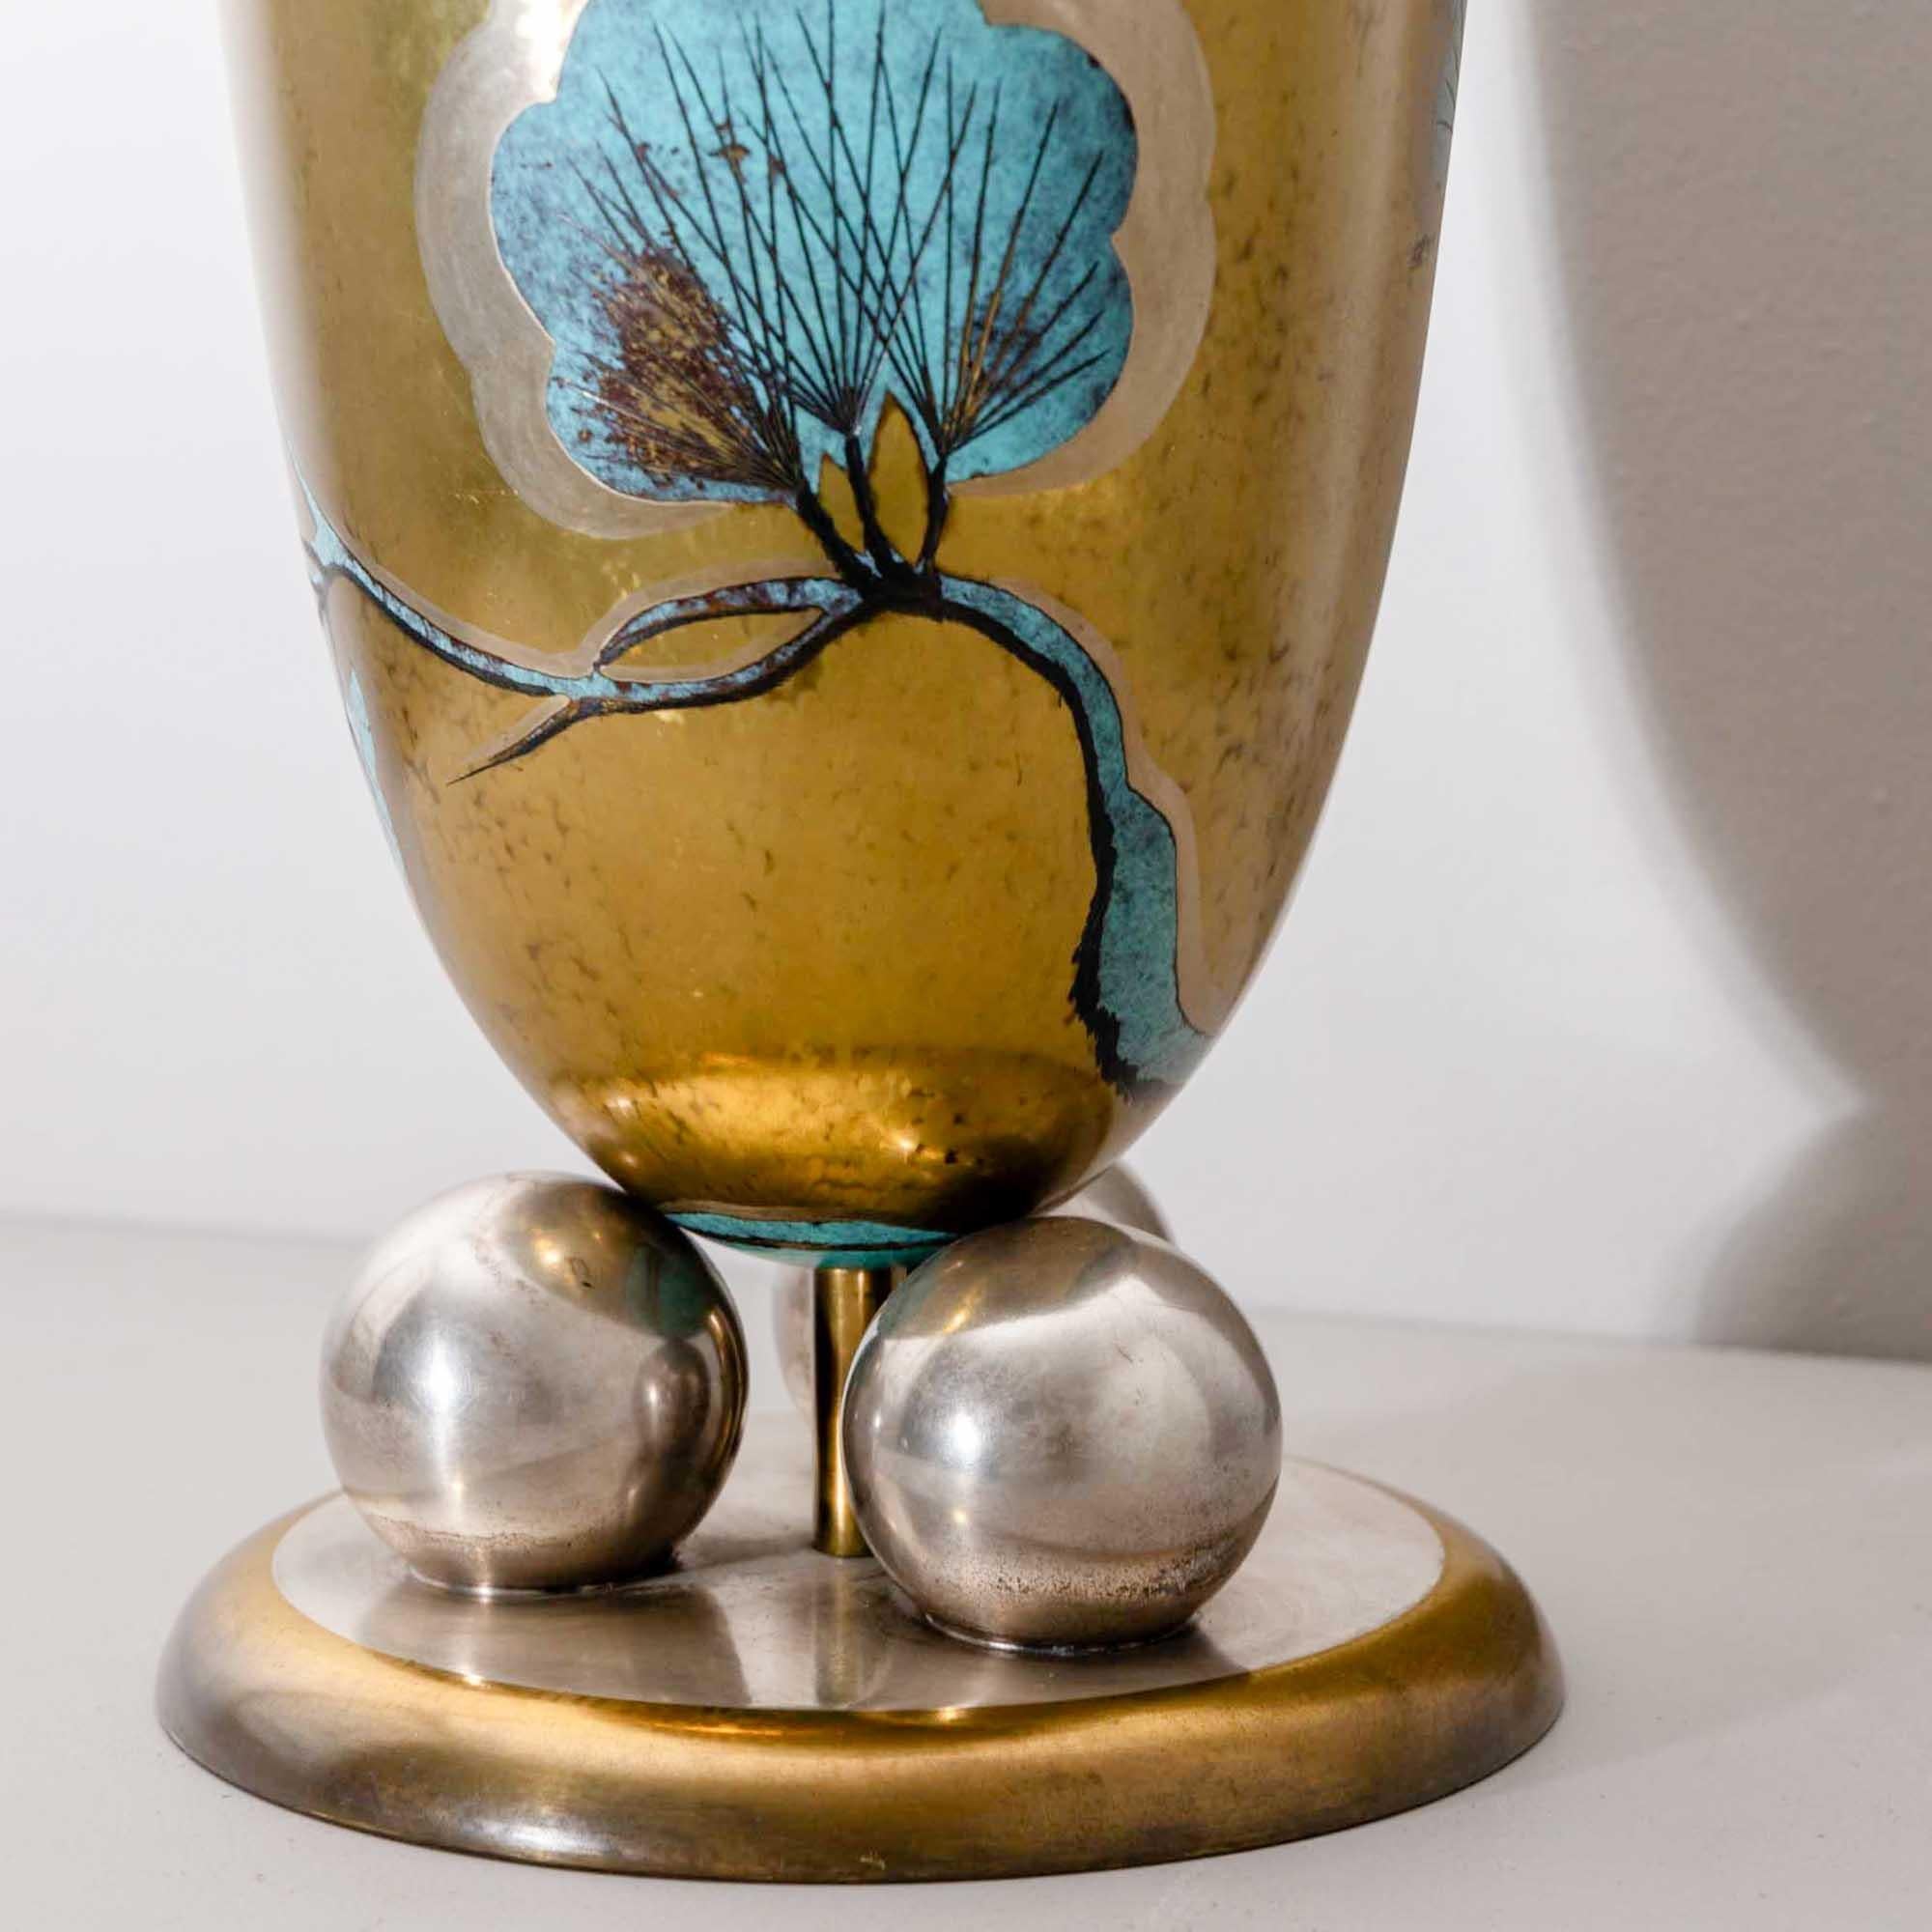 German Large WMF Vase with Pine Branch Décor, 1920s/30s